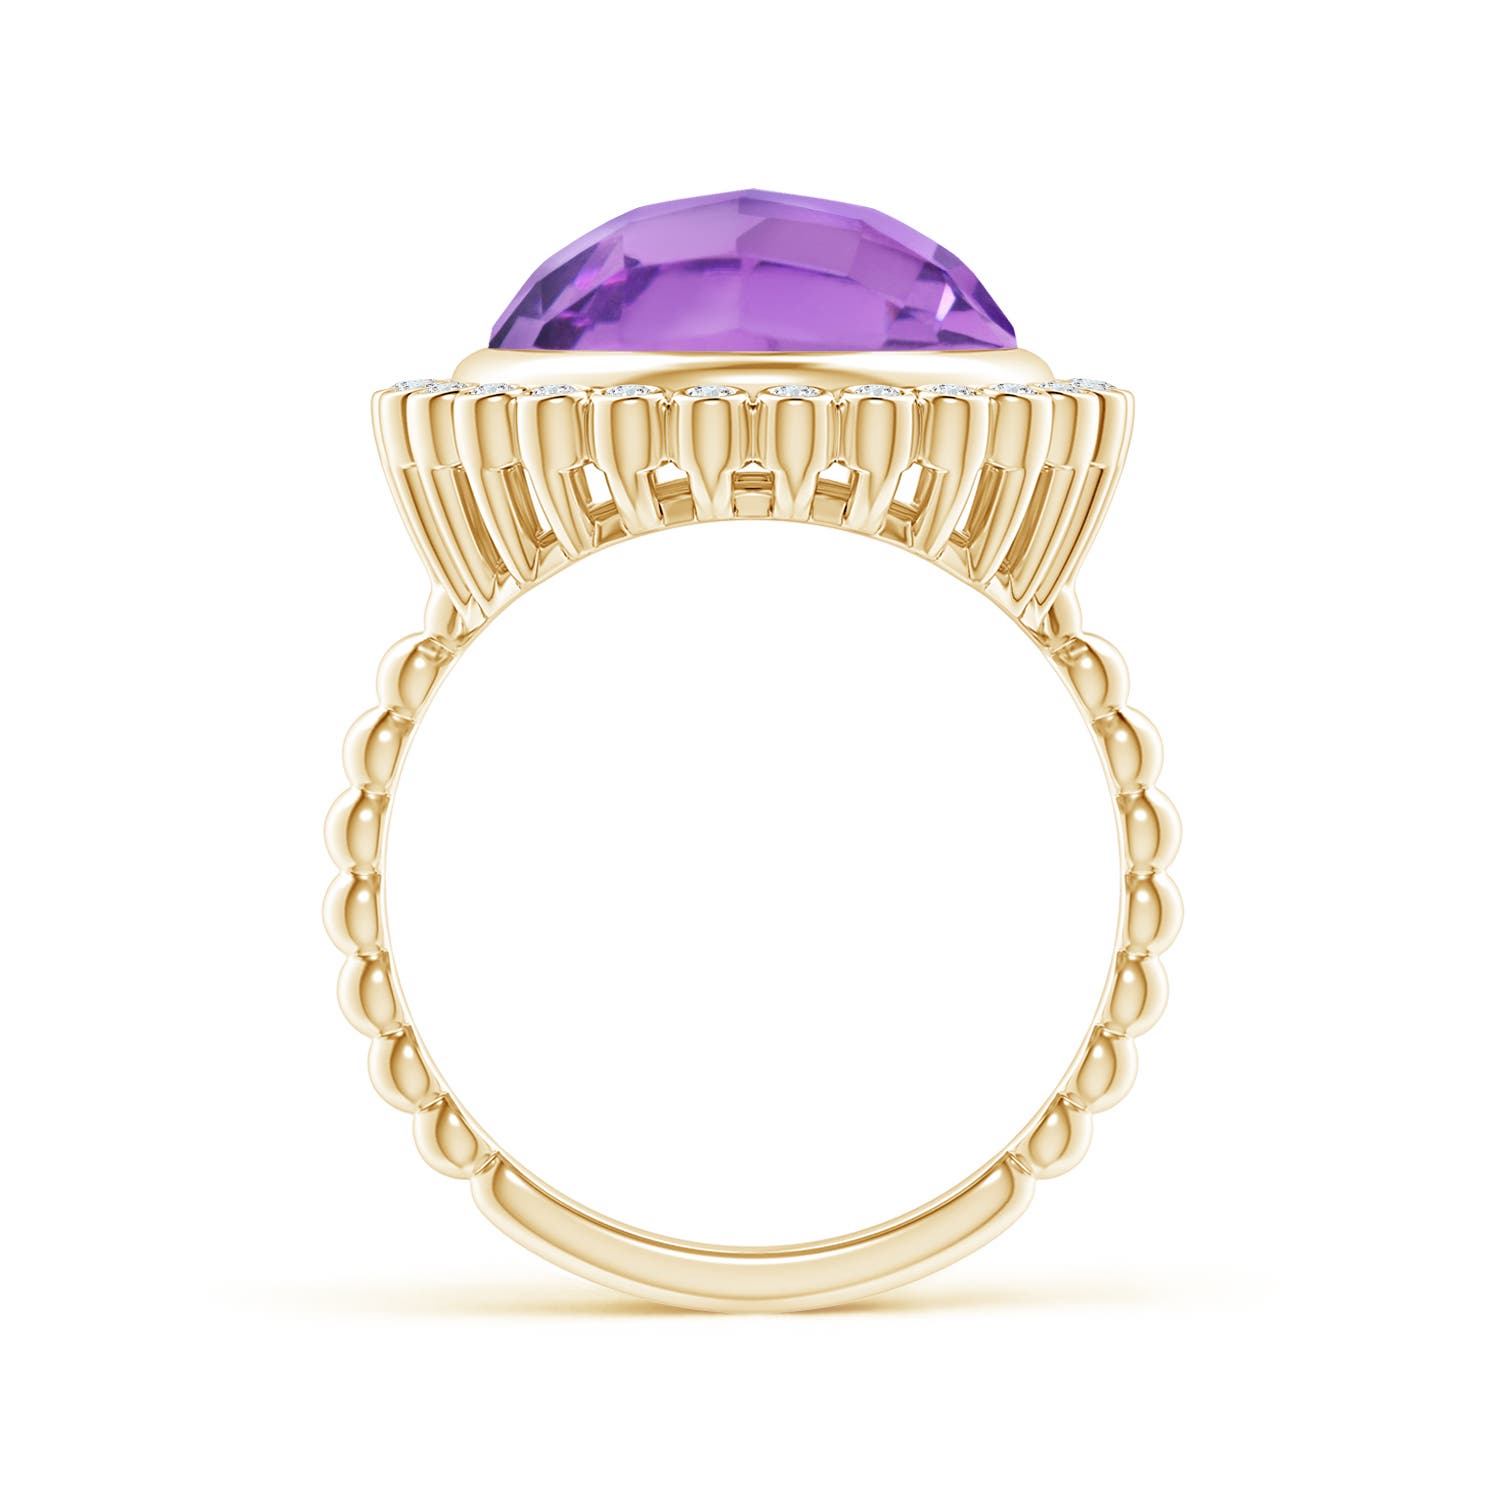 A - Amethyst / 5.71 CT / 14 KT Yellow Gold